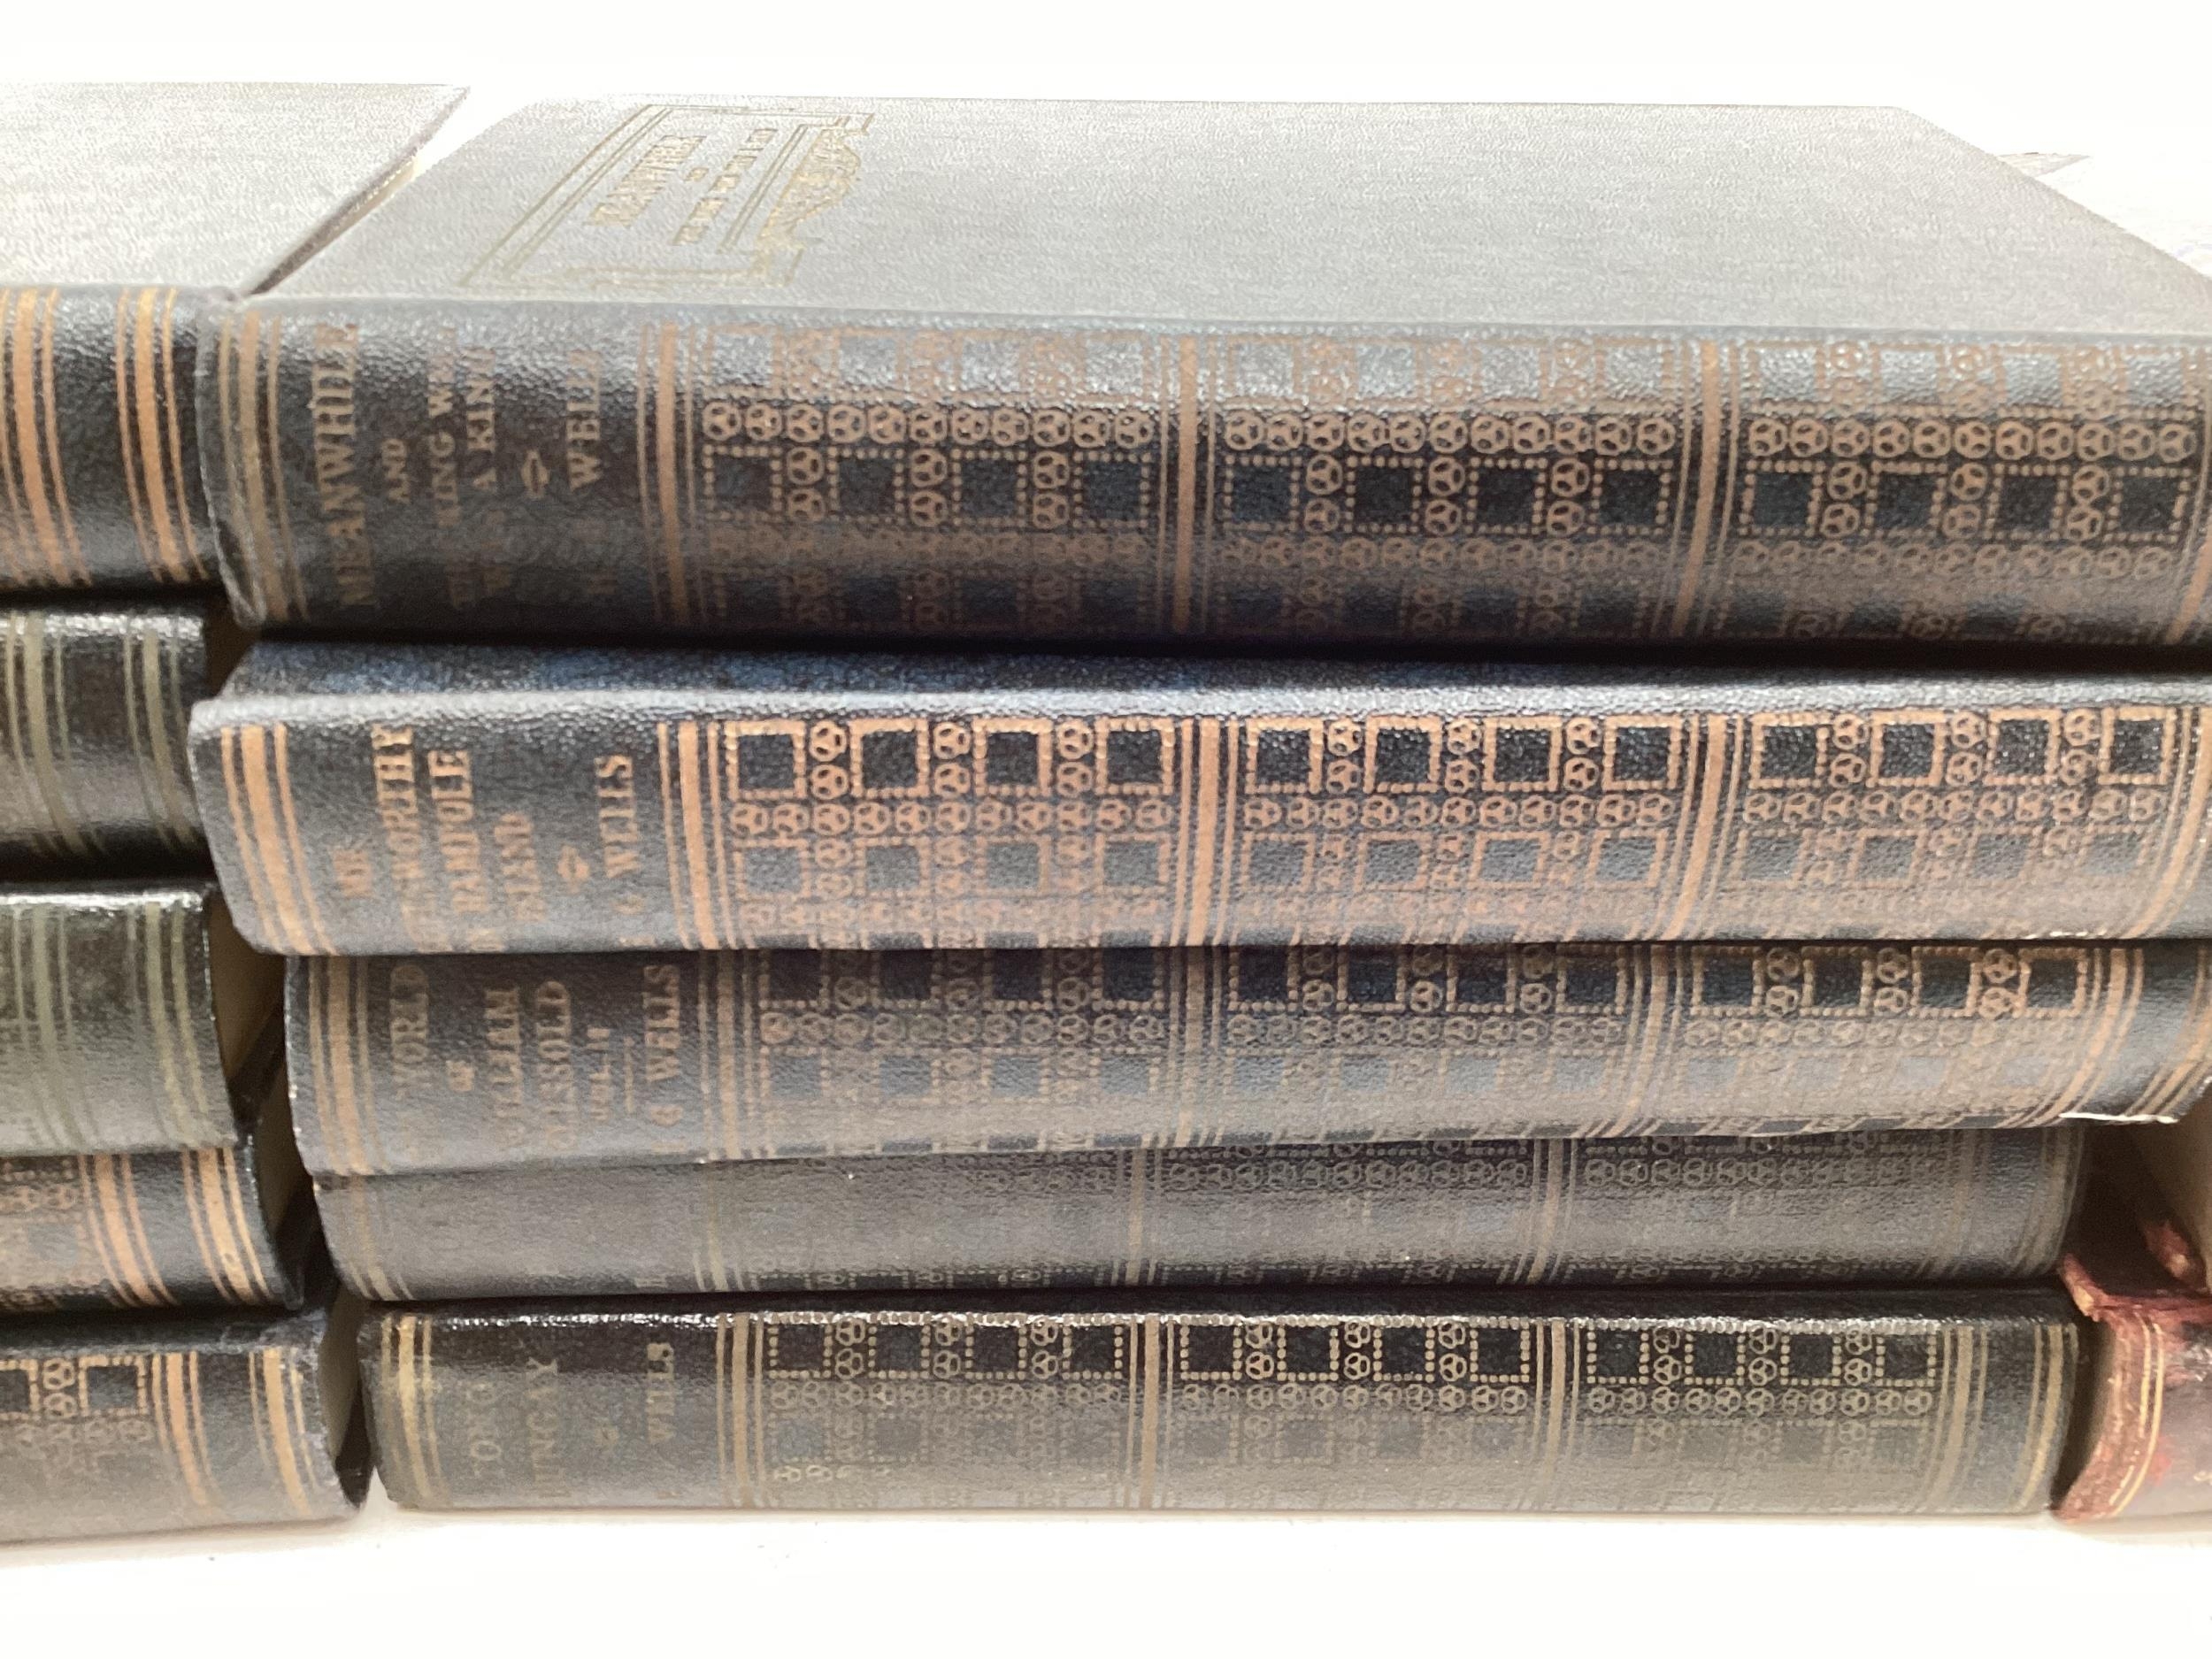 The works of HG Wells in 10 volumes and 4 volumes of Lytton's novels. - Image 4 of 9